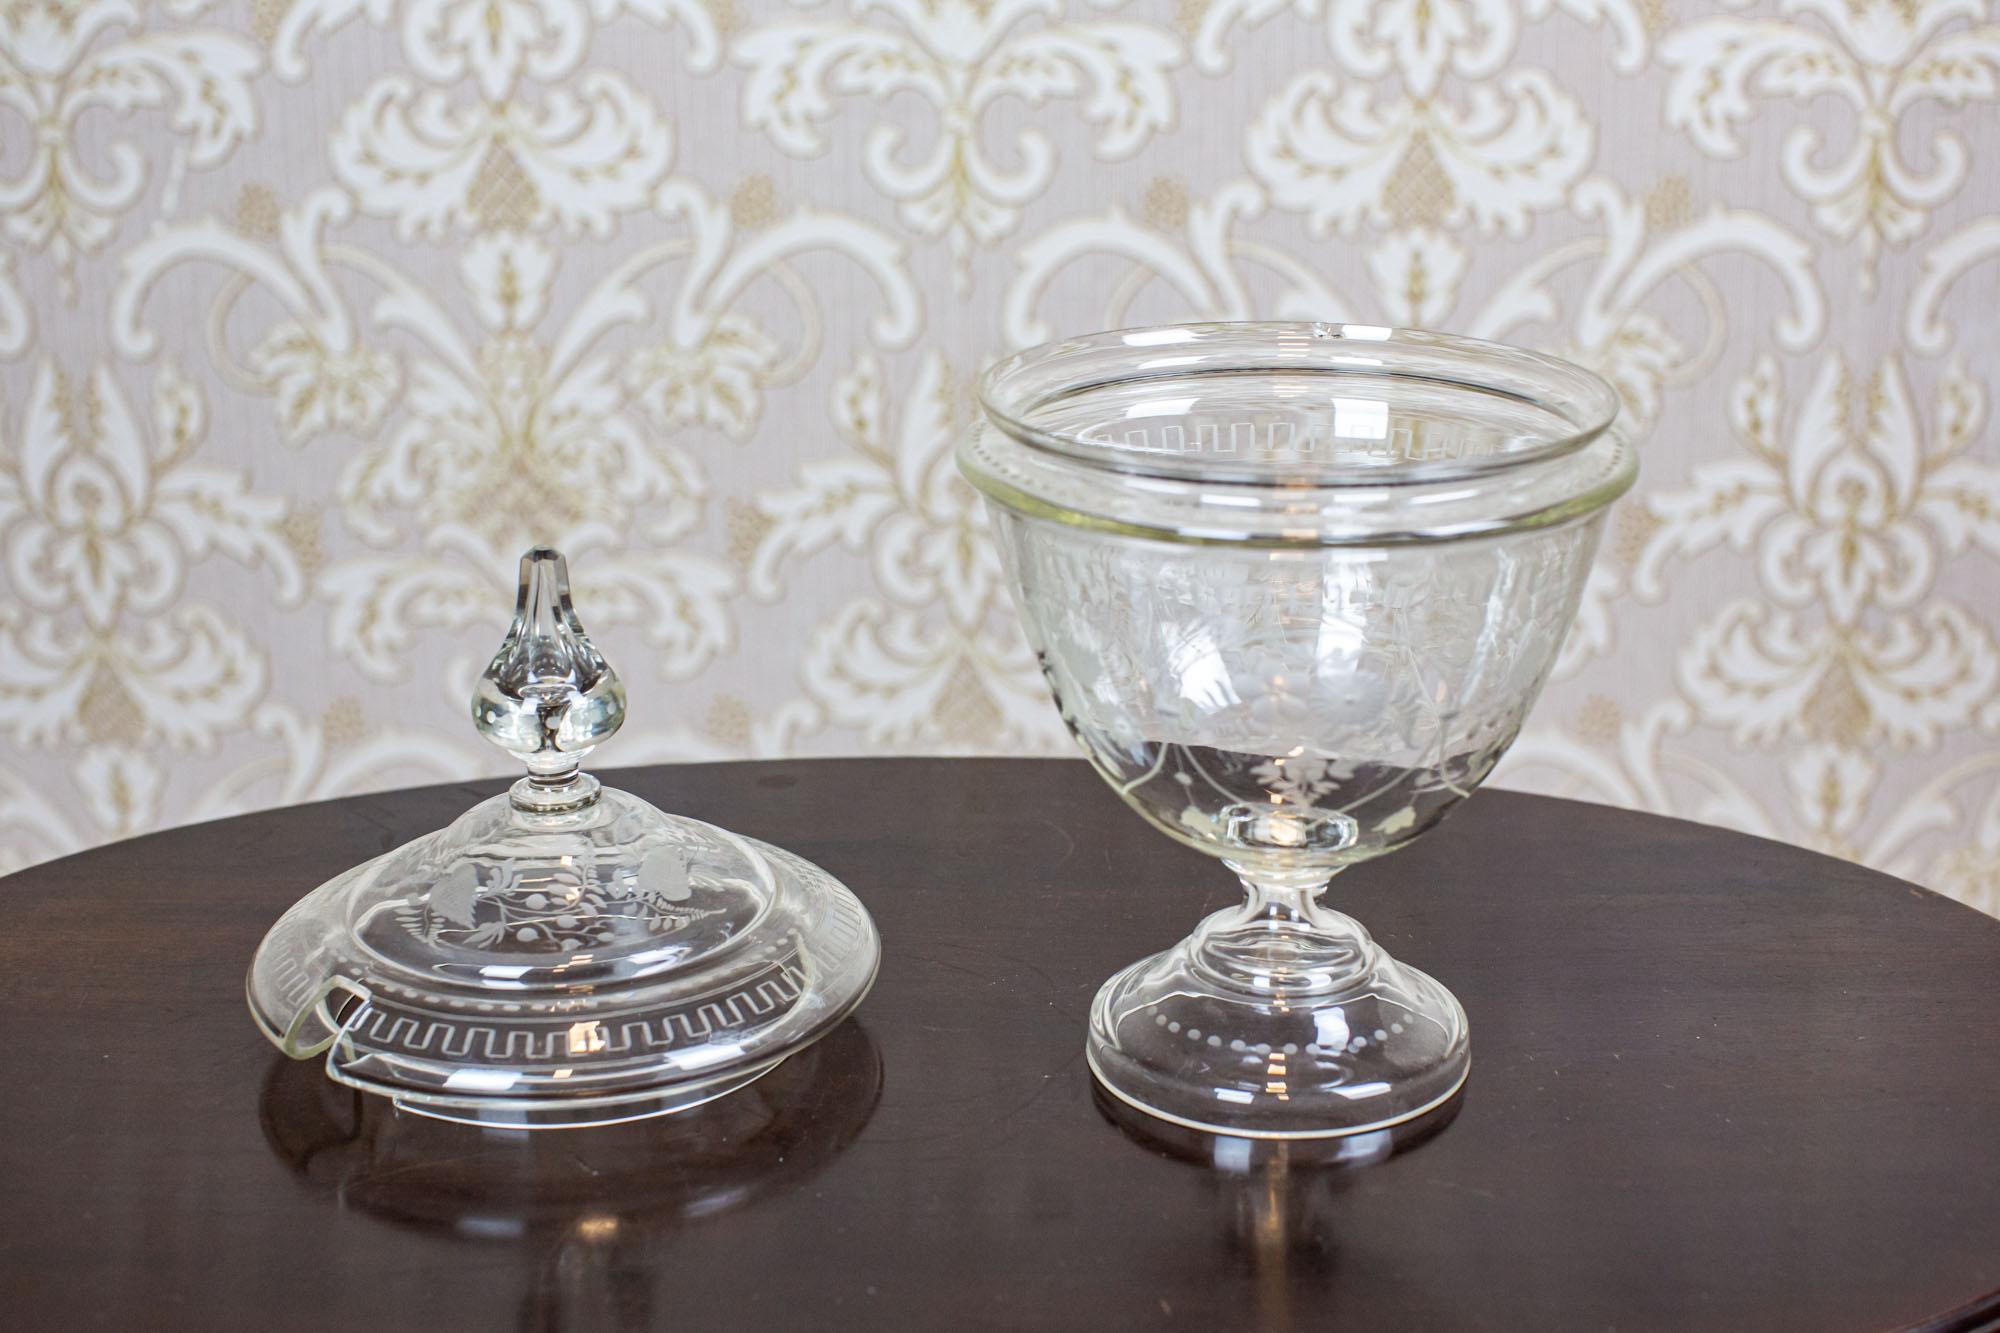 Prewar Crystal Bonbonniere Decorated with Floral Motifs In Good Condition For Sale In Opole, PL